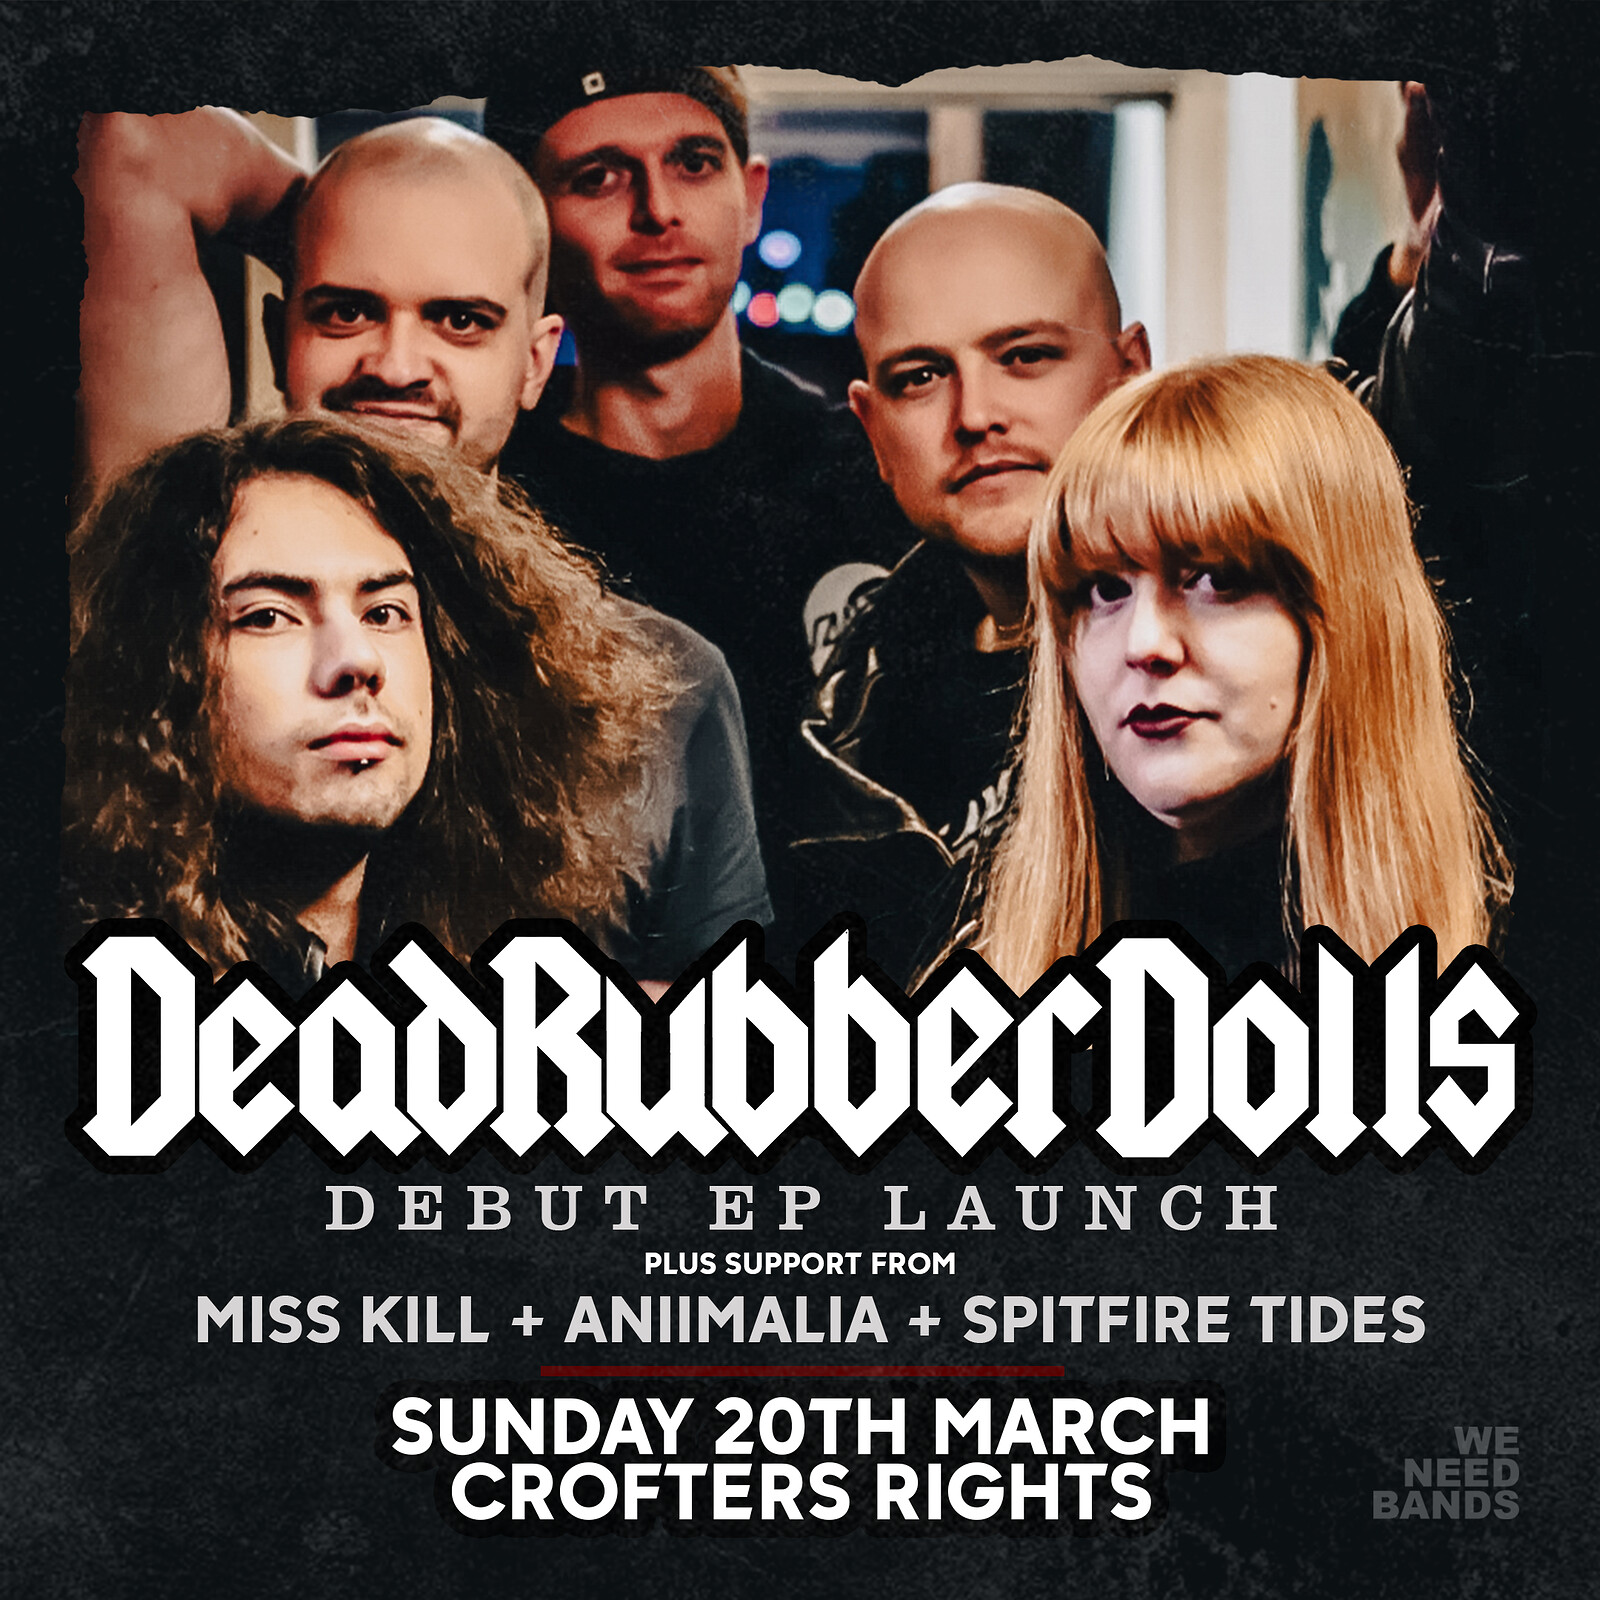 WE NEED BANDS | Dead Rubber Dolls EP Launch at Crofters Rights